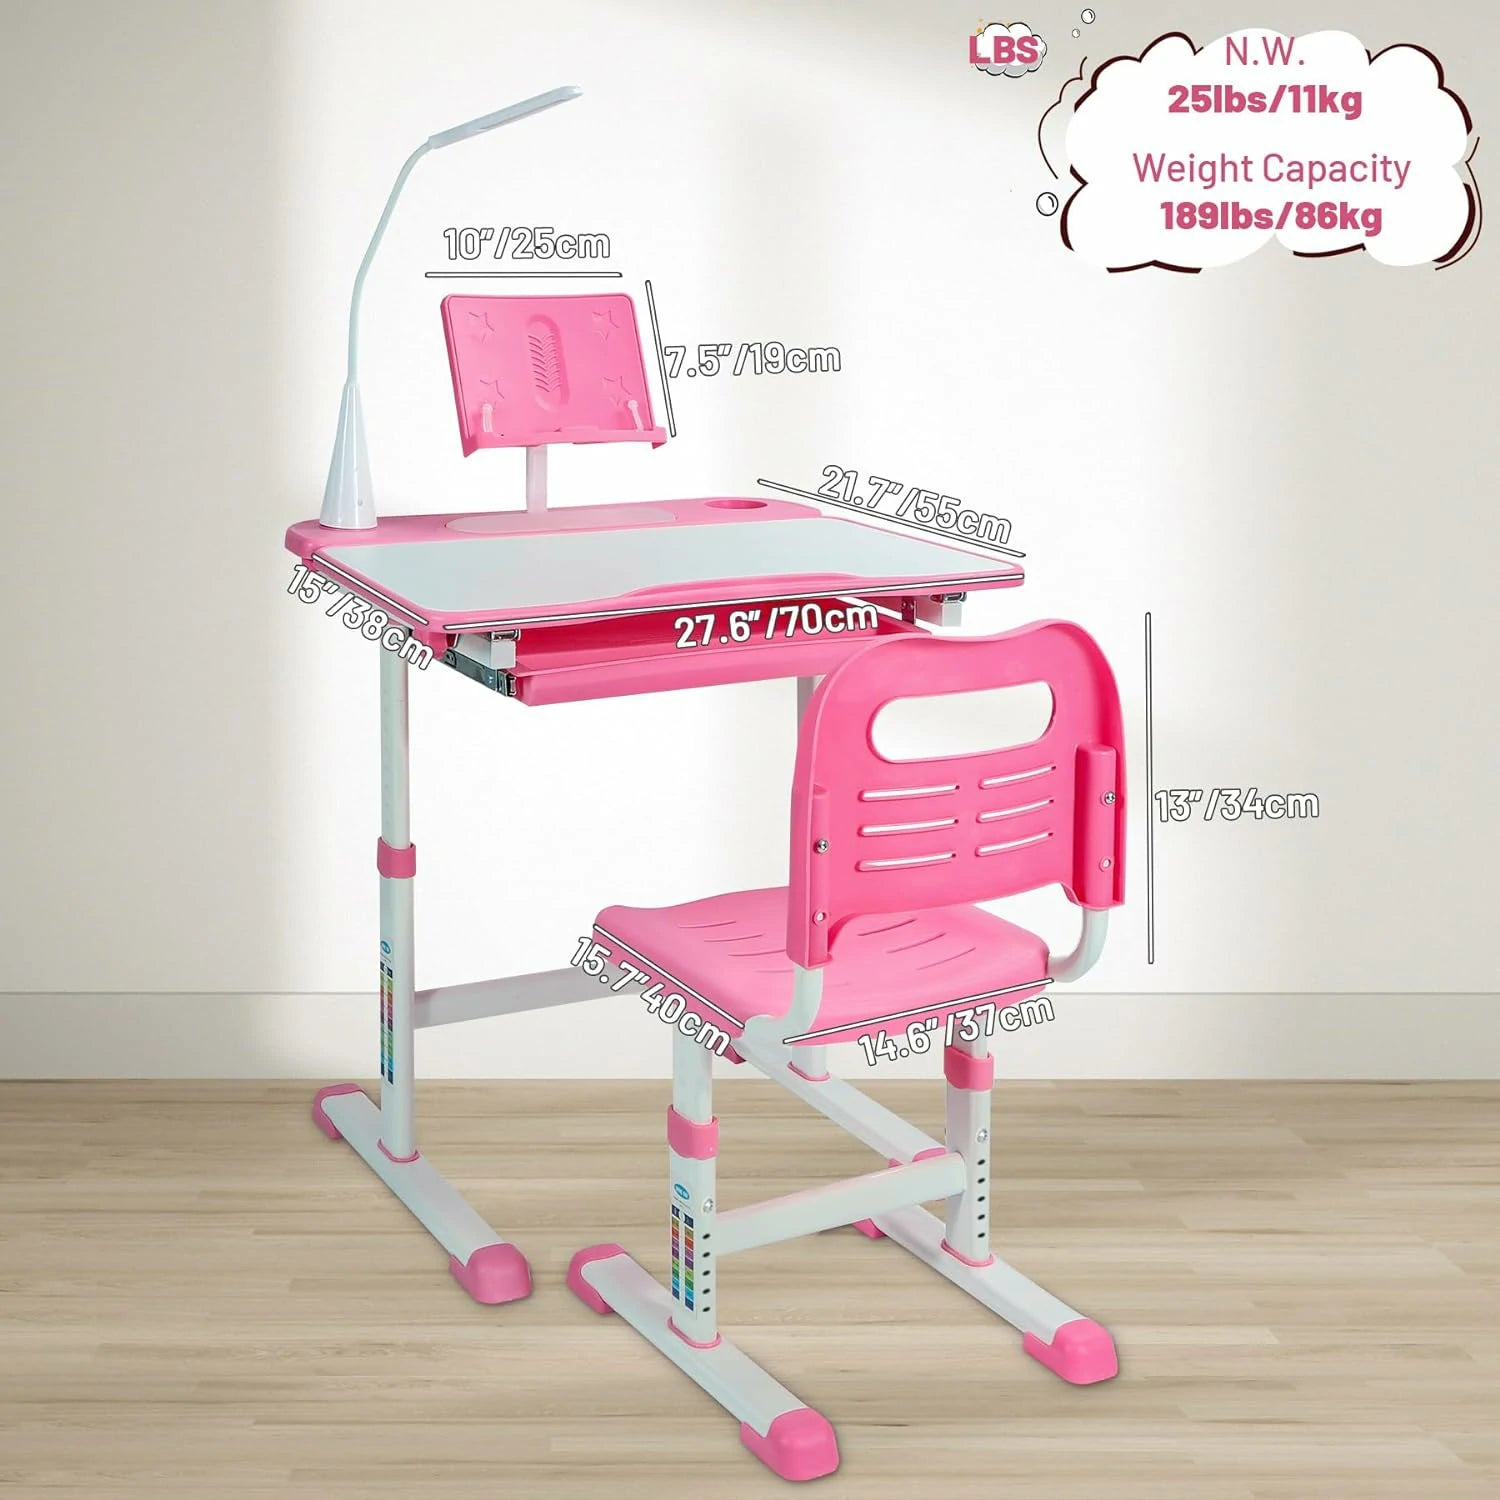 Kids Desk and Chair Set